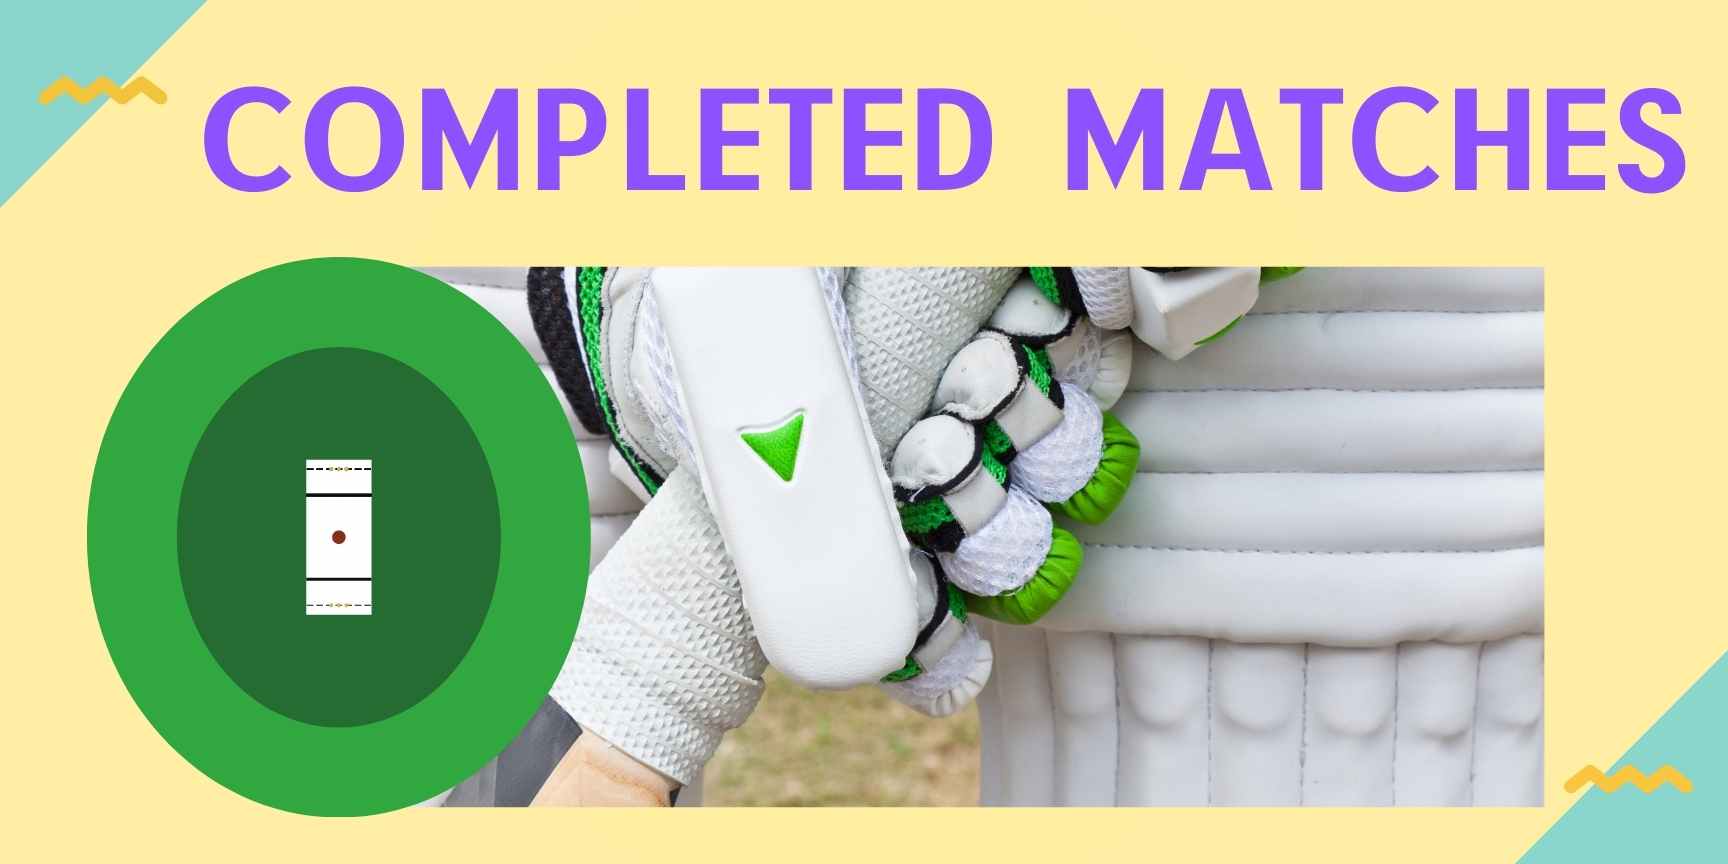 completed matches